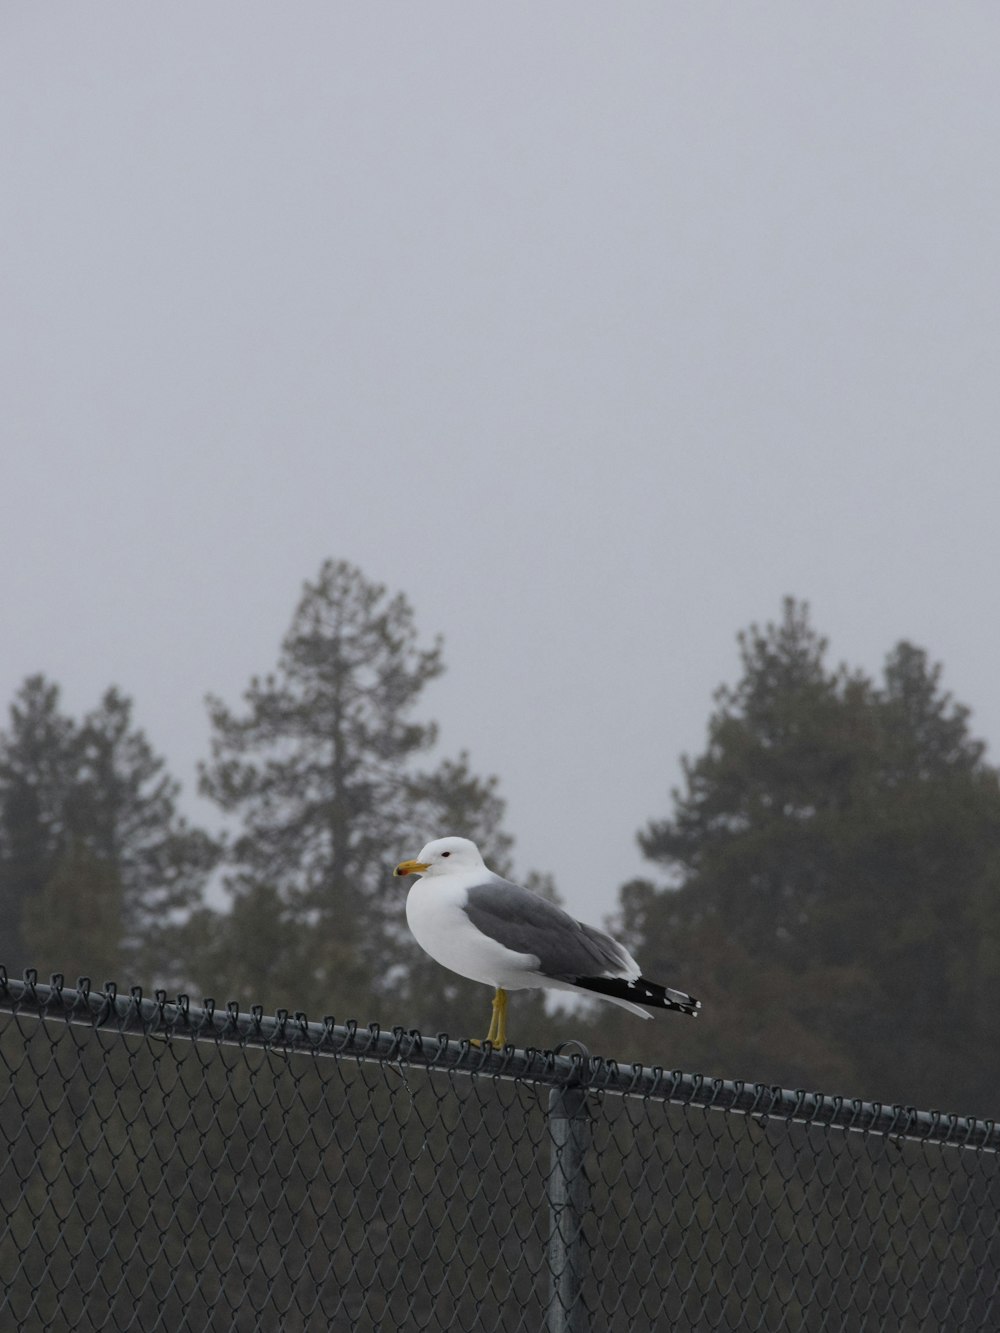 a seagull sitting on a fence with trees in the background